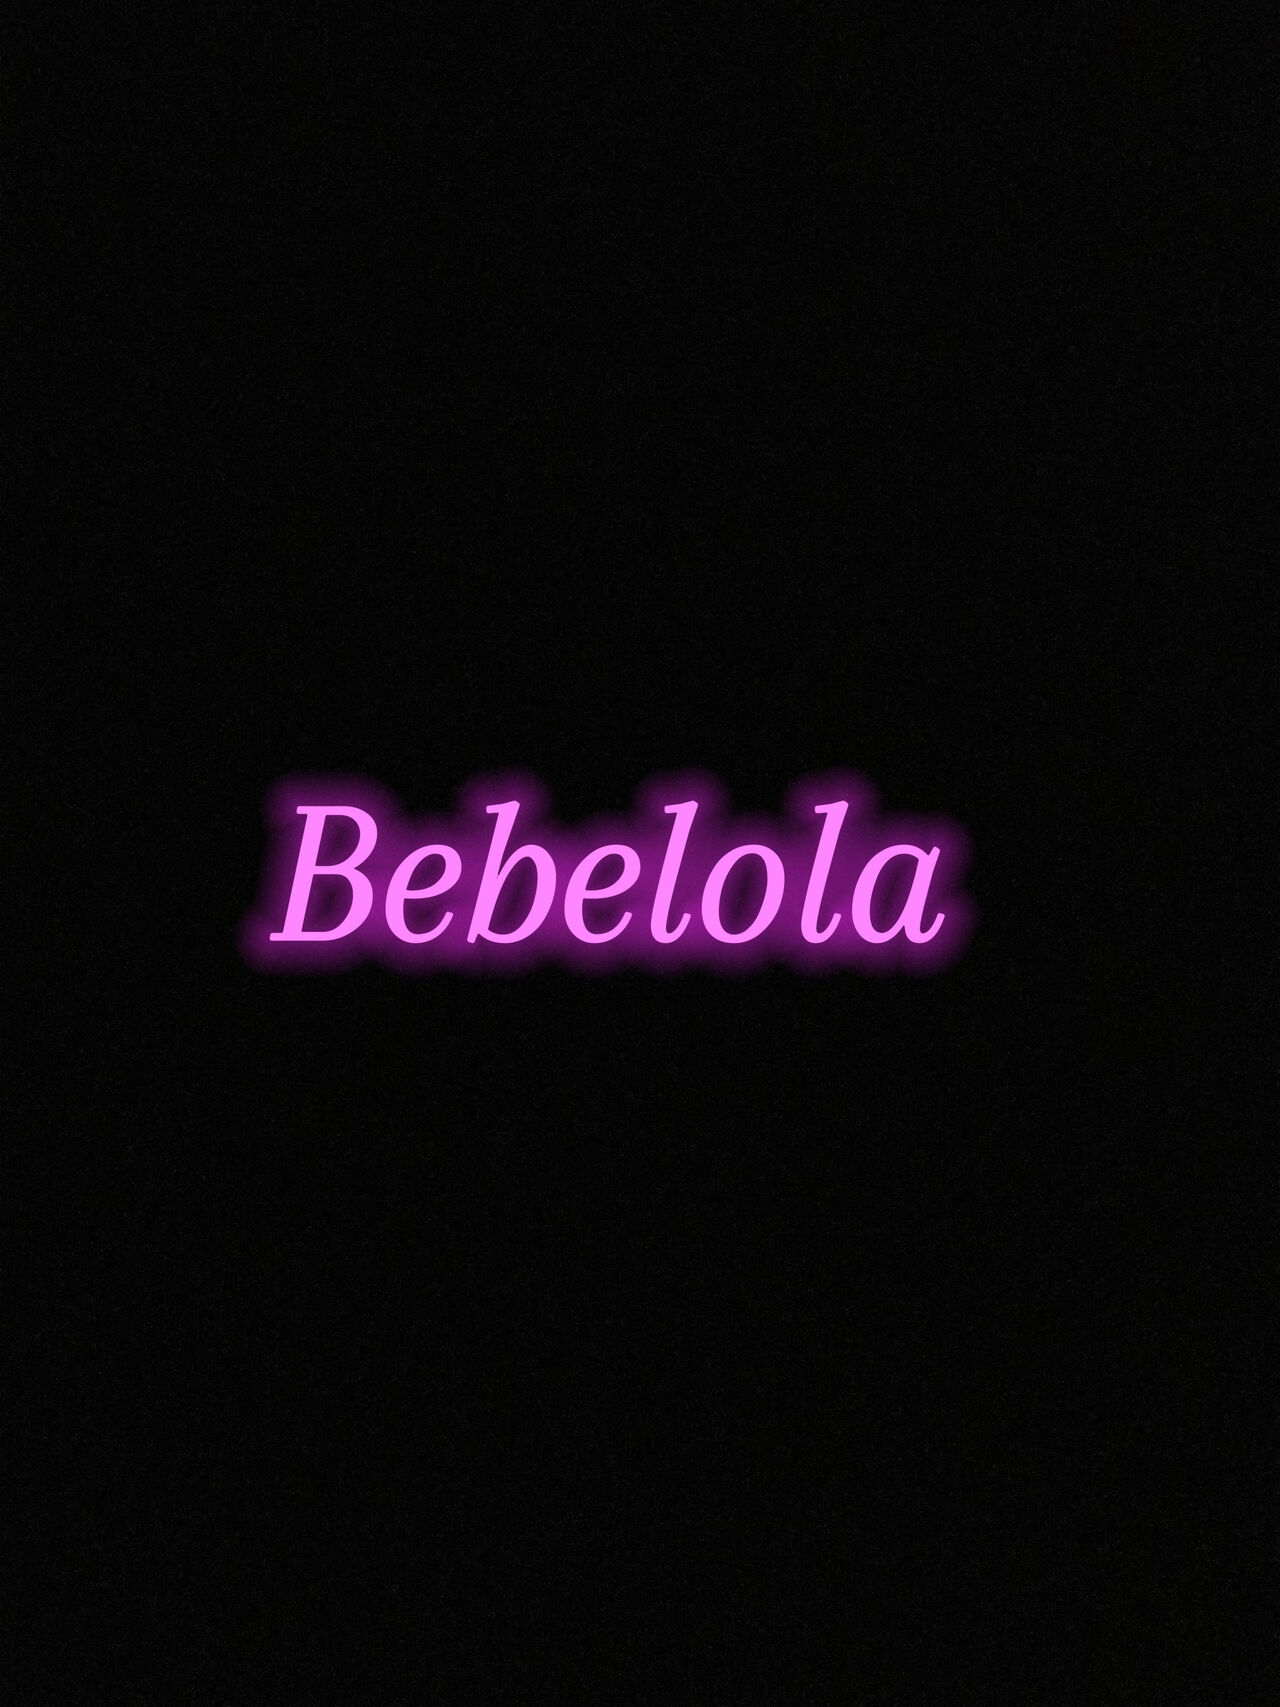 See Bebelola your favourite Finnish girl profile